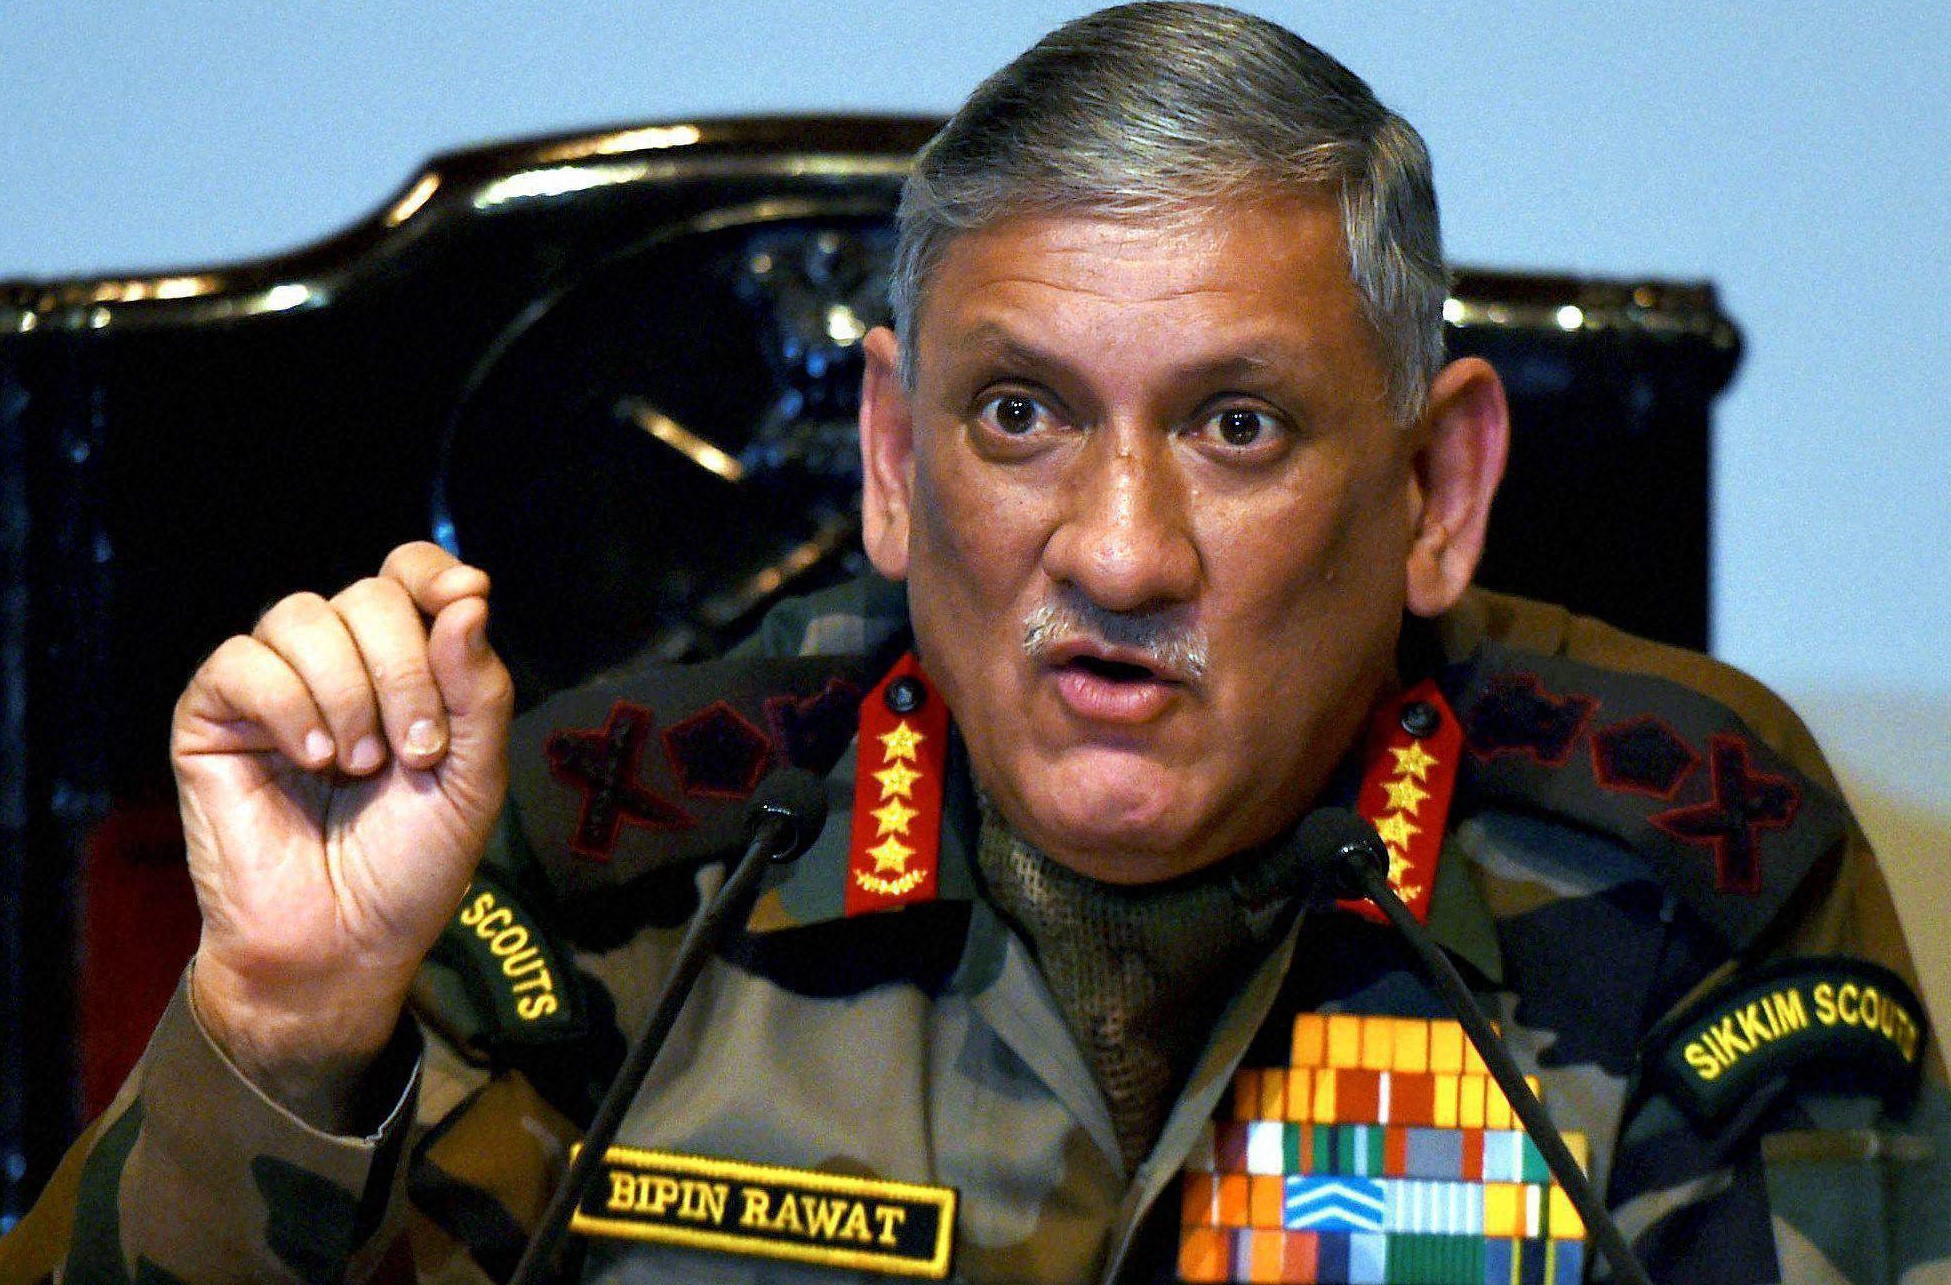 Terrorism new form of warfare, need control over social media to stop radicalisation: Army Chief Gen. Bipin Rawat